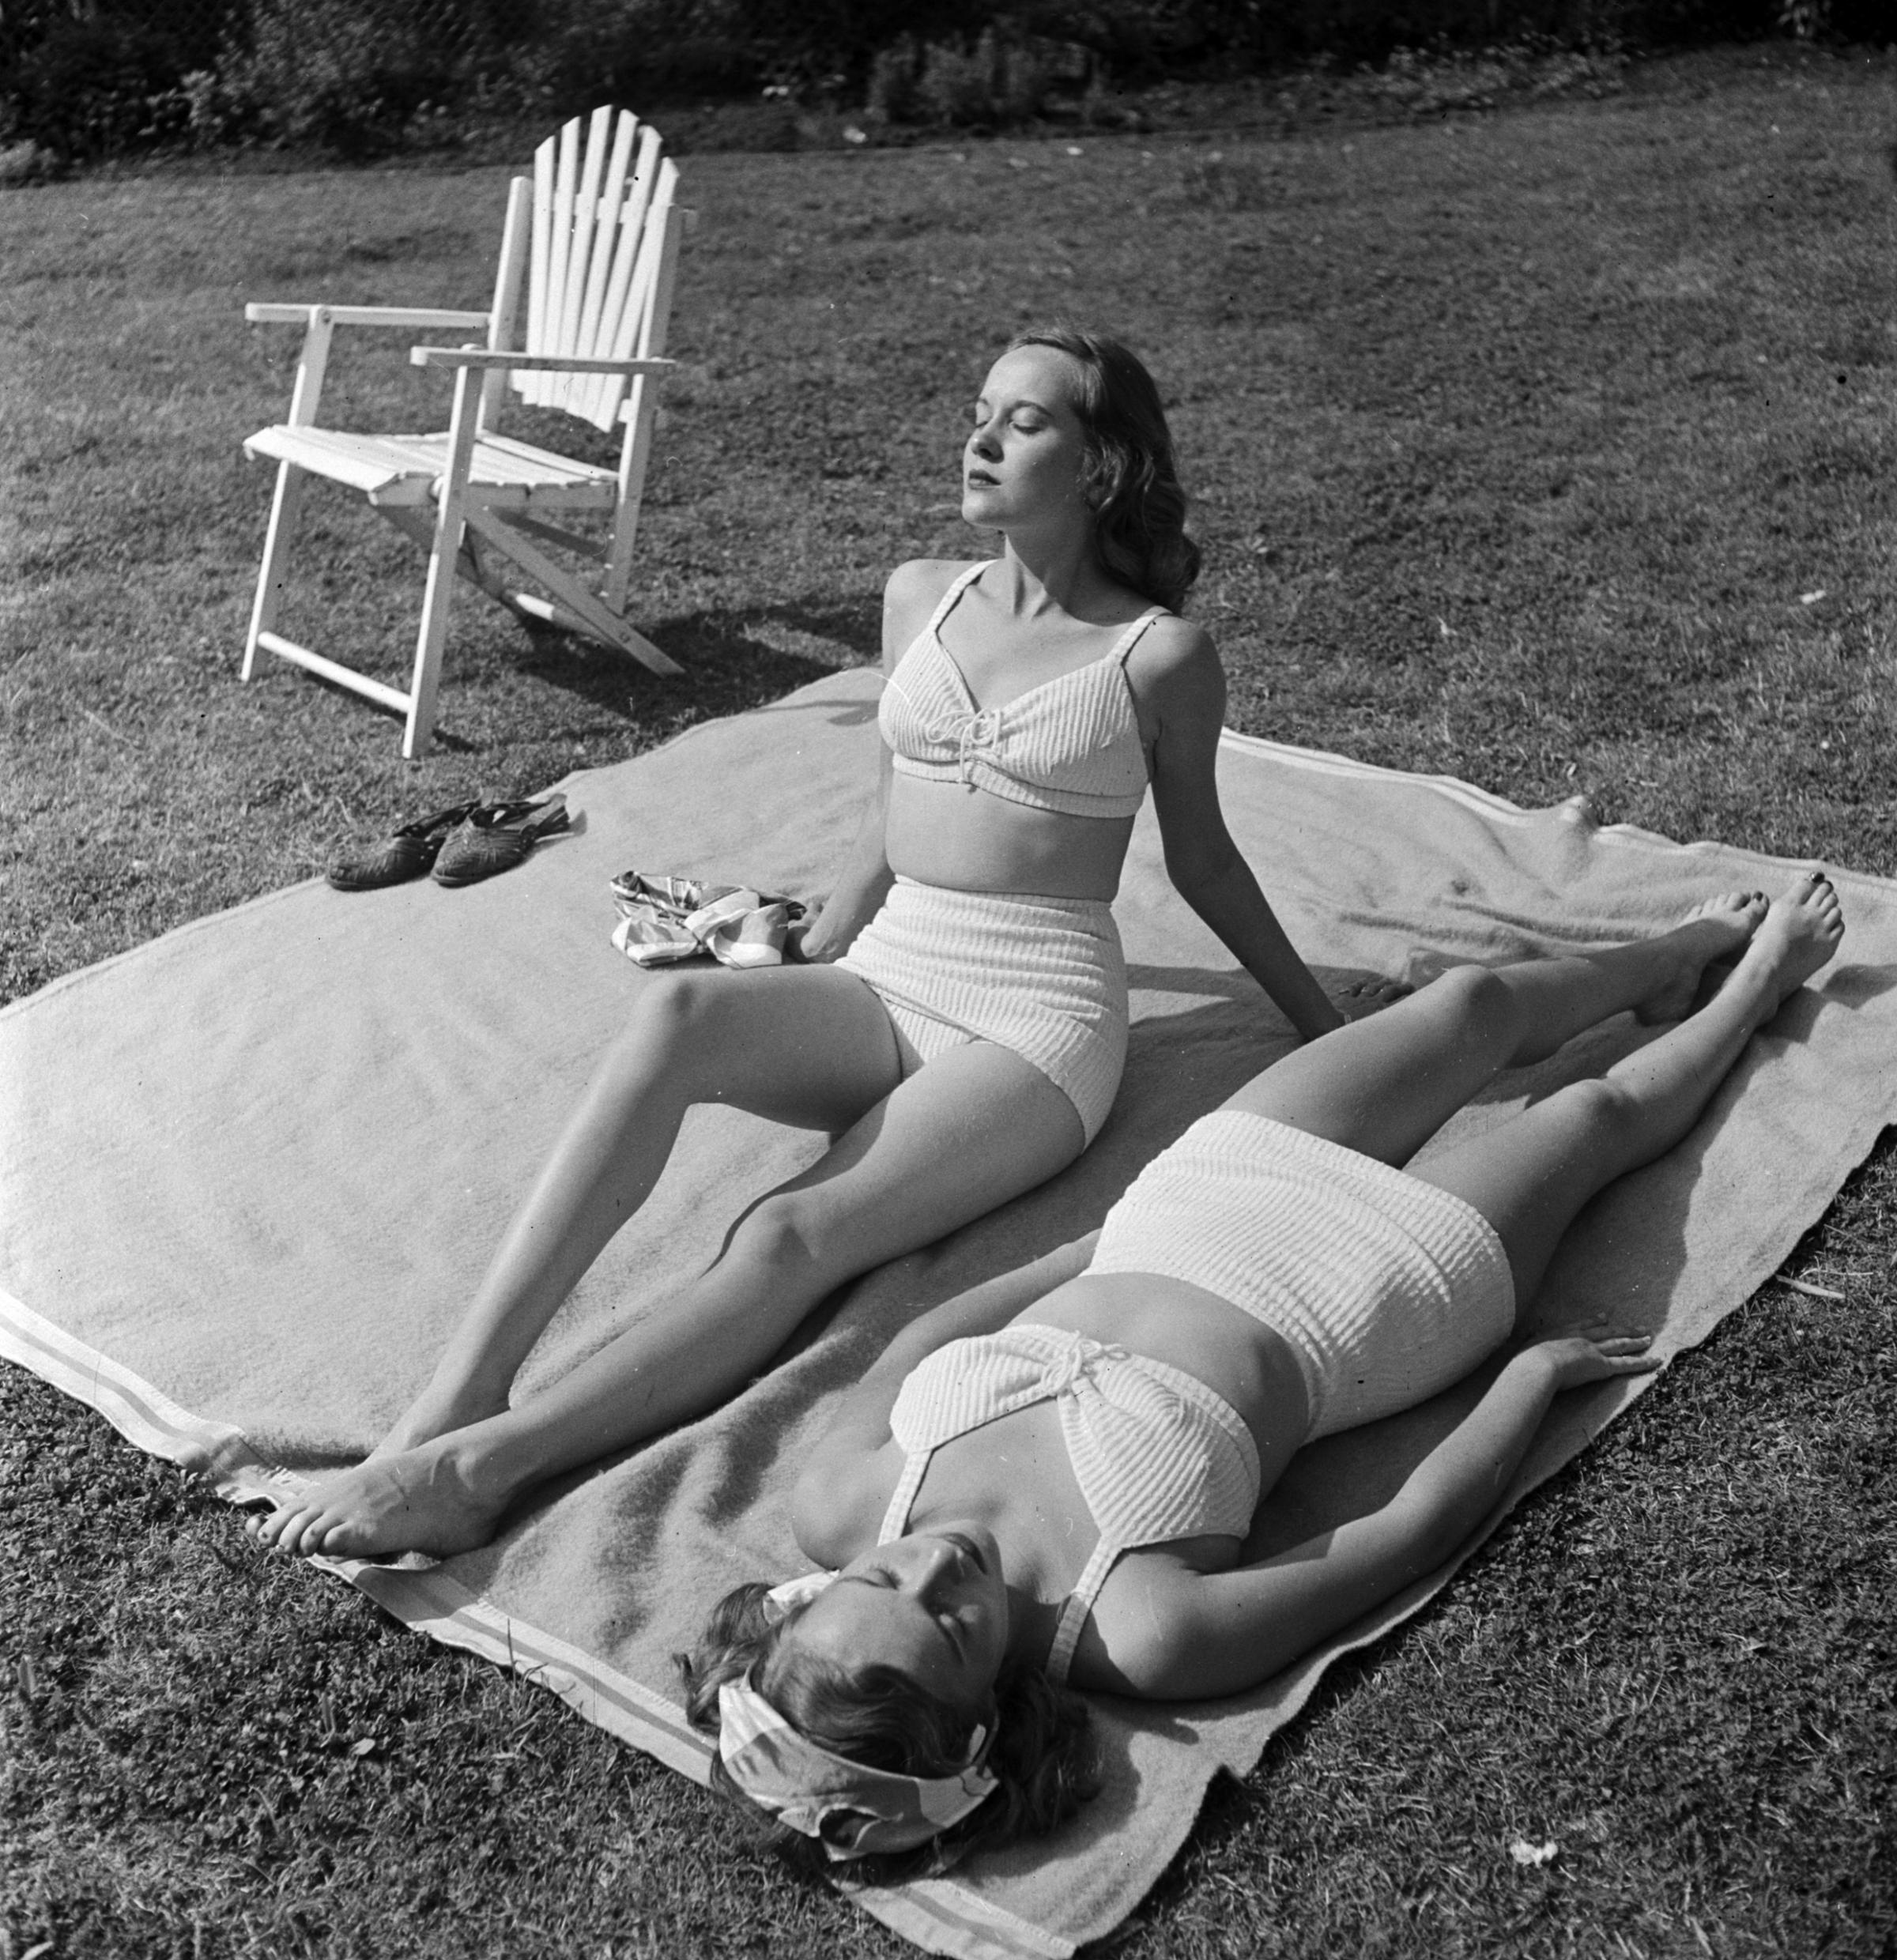 Identical twins, Barbara and Betty Bounds sunbathing.